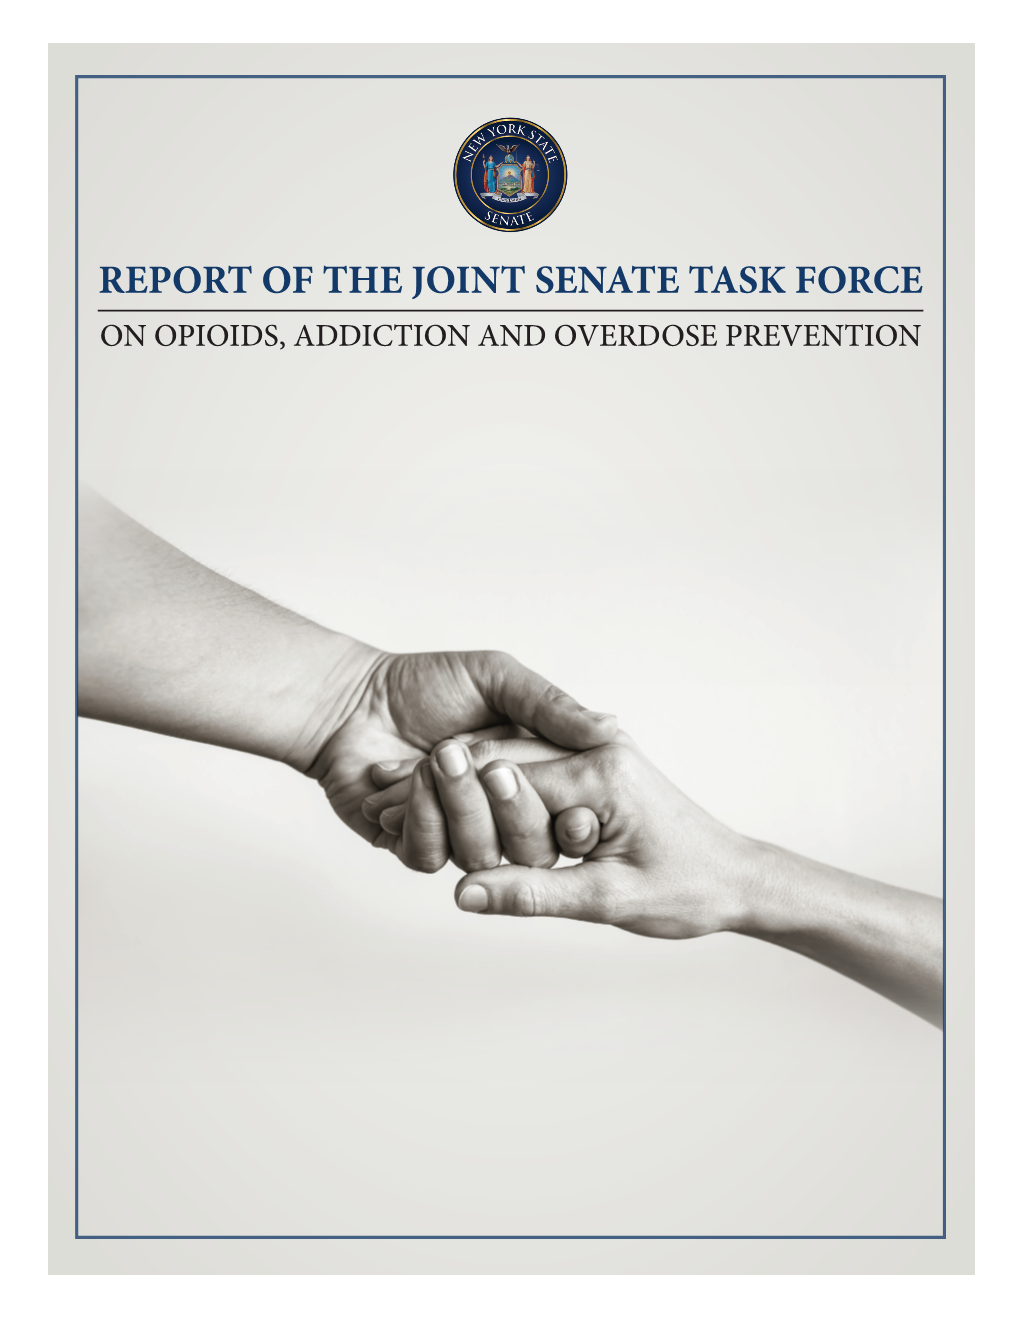 Report of the Joint Senate Task Force on Opioids, Addictions, and Overdose Prevention